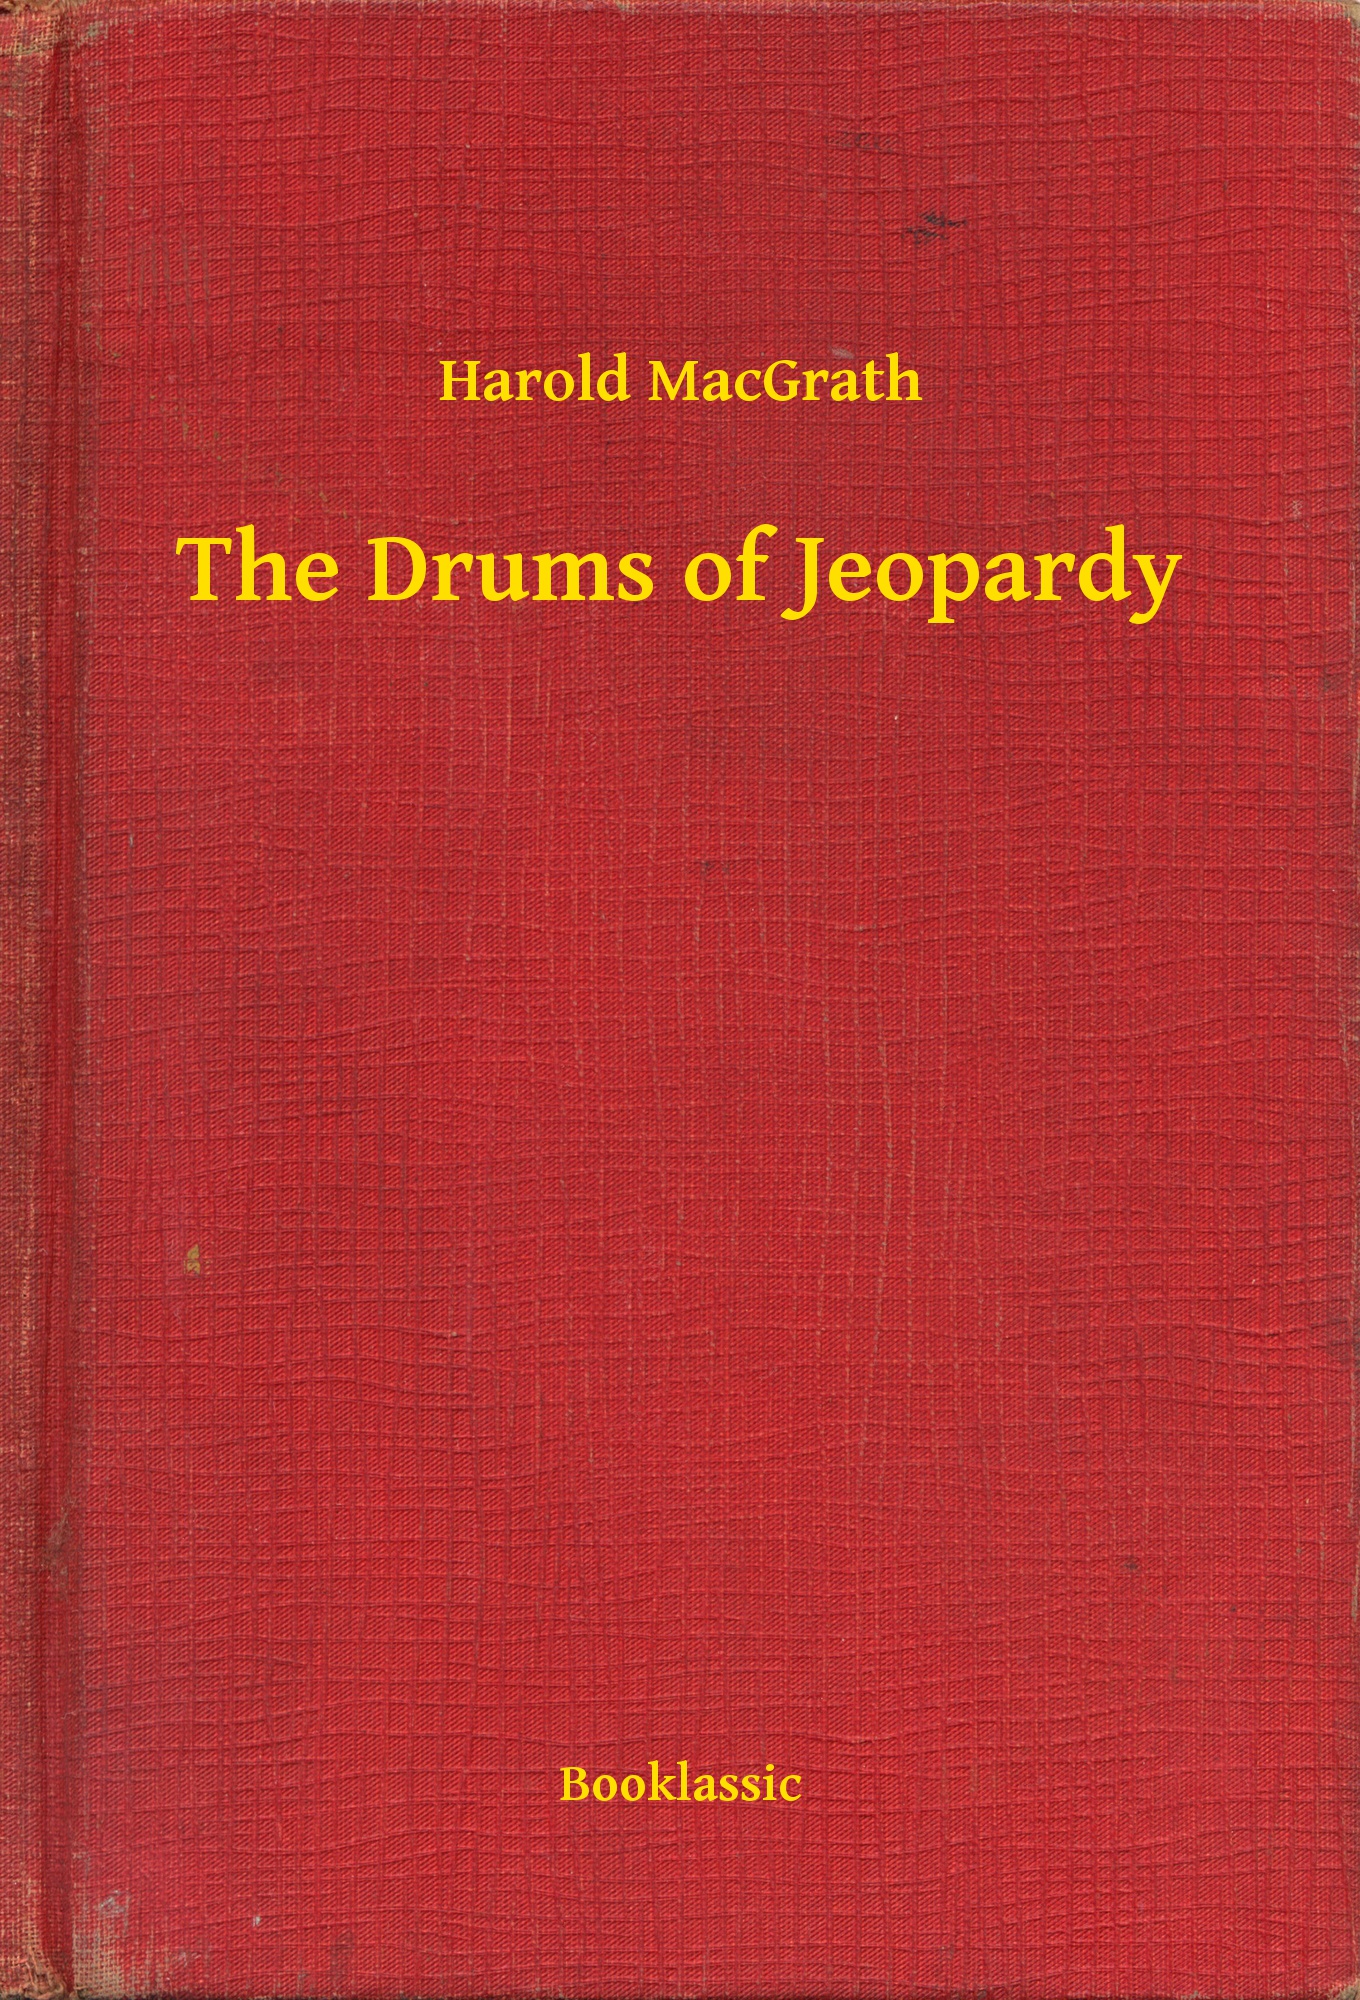 The Drums of Jeopardy